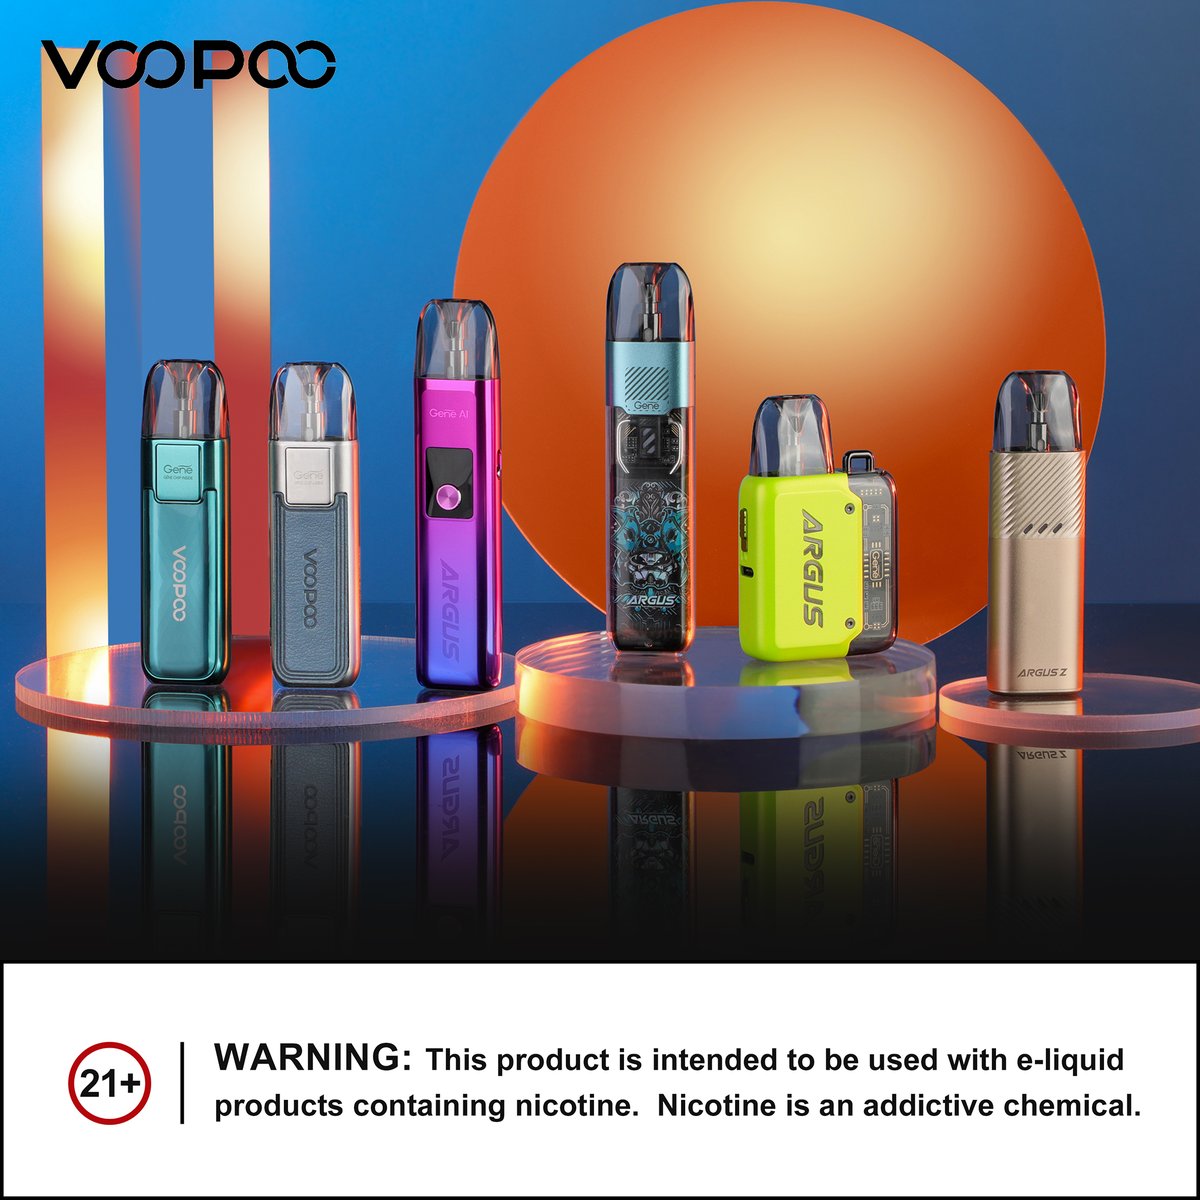 Get ready to enjoy the Argus Pod Family! Thanks to the incredible iCOSM CODE, VOOPOO's pod series delivers an unforgettable flavor experience that will leave you craving for more.💥

#voopoo #voopooargus #argusp1s #arguspod #argusp1 #argusz #argusG #arguspodse #arguspodsfamily